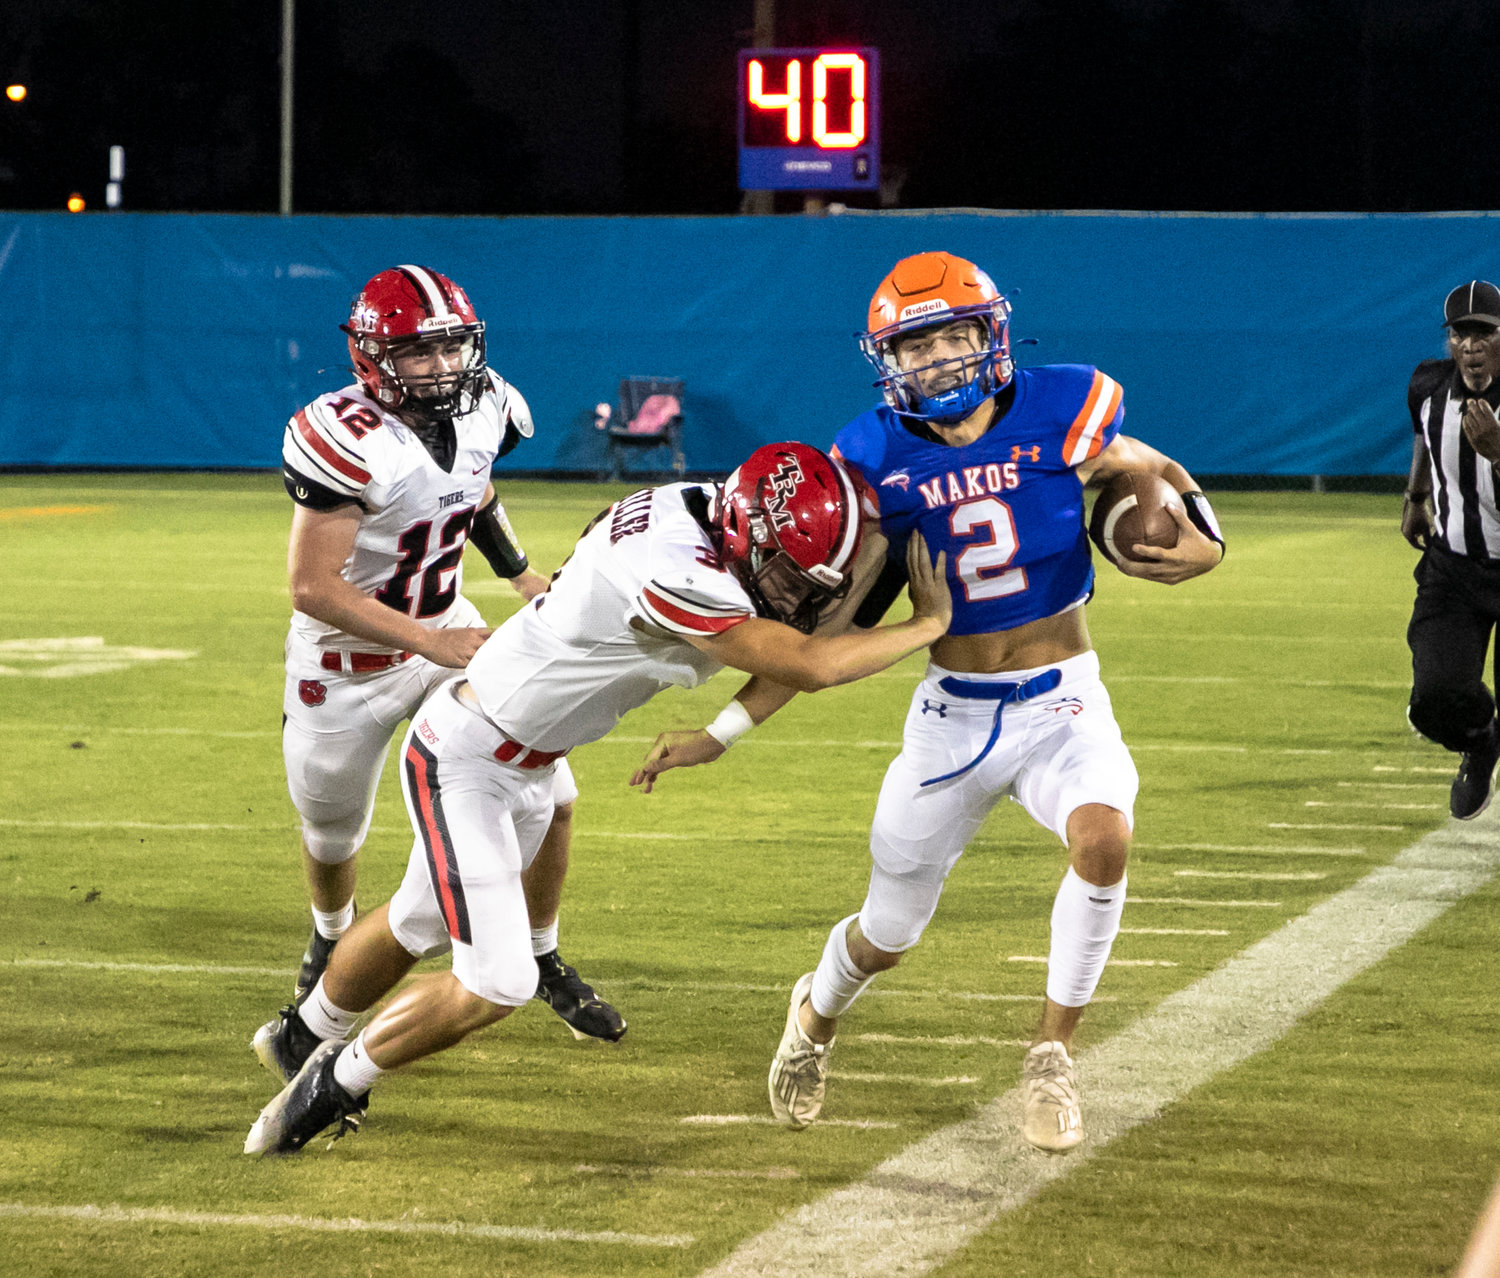 Orange Beach senior Cash Turner is pushed out of bounds by T.R. Miller senior Broox Hart during the region contest between the Makos and Tigers at the Orange Beach Sportsplex Friday, Sept. 16.